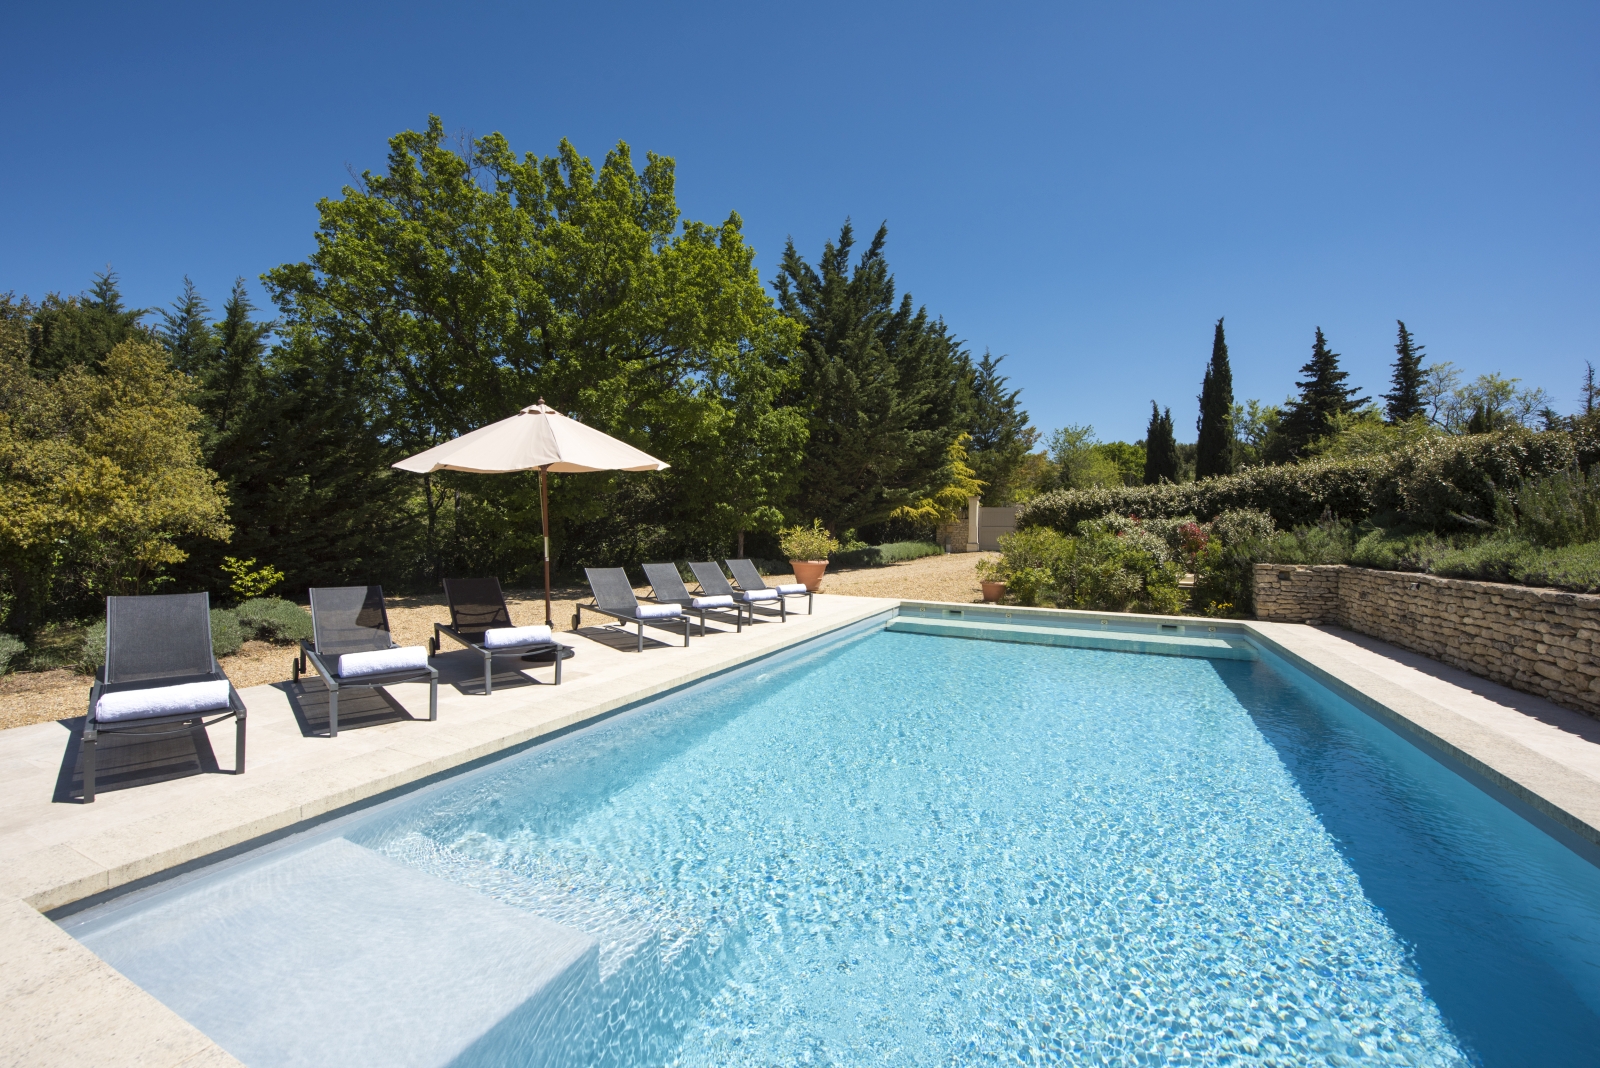 Pool and pool area with sun loungers, towels and umbrellas at Mas du Buis in Provence, France